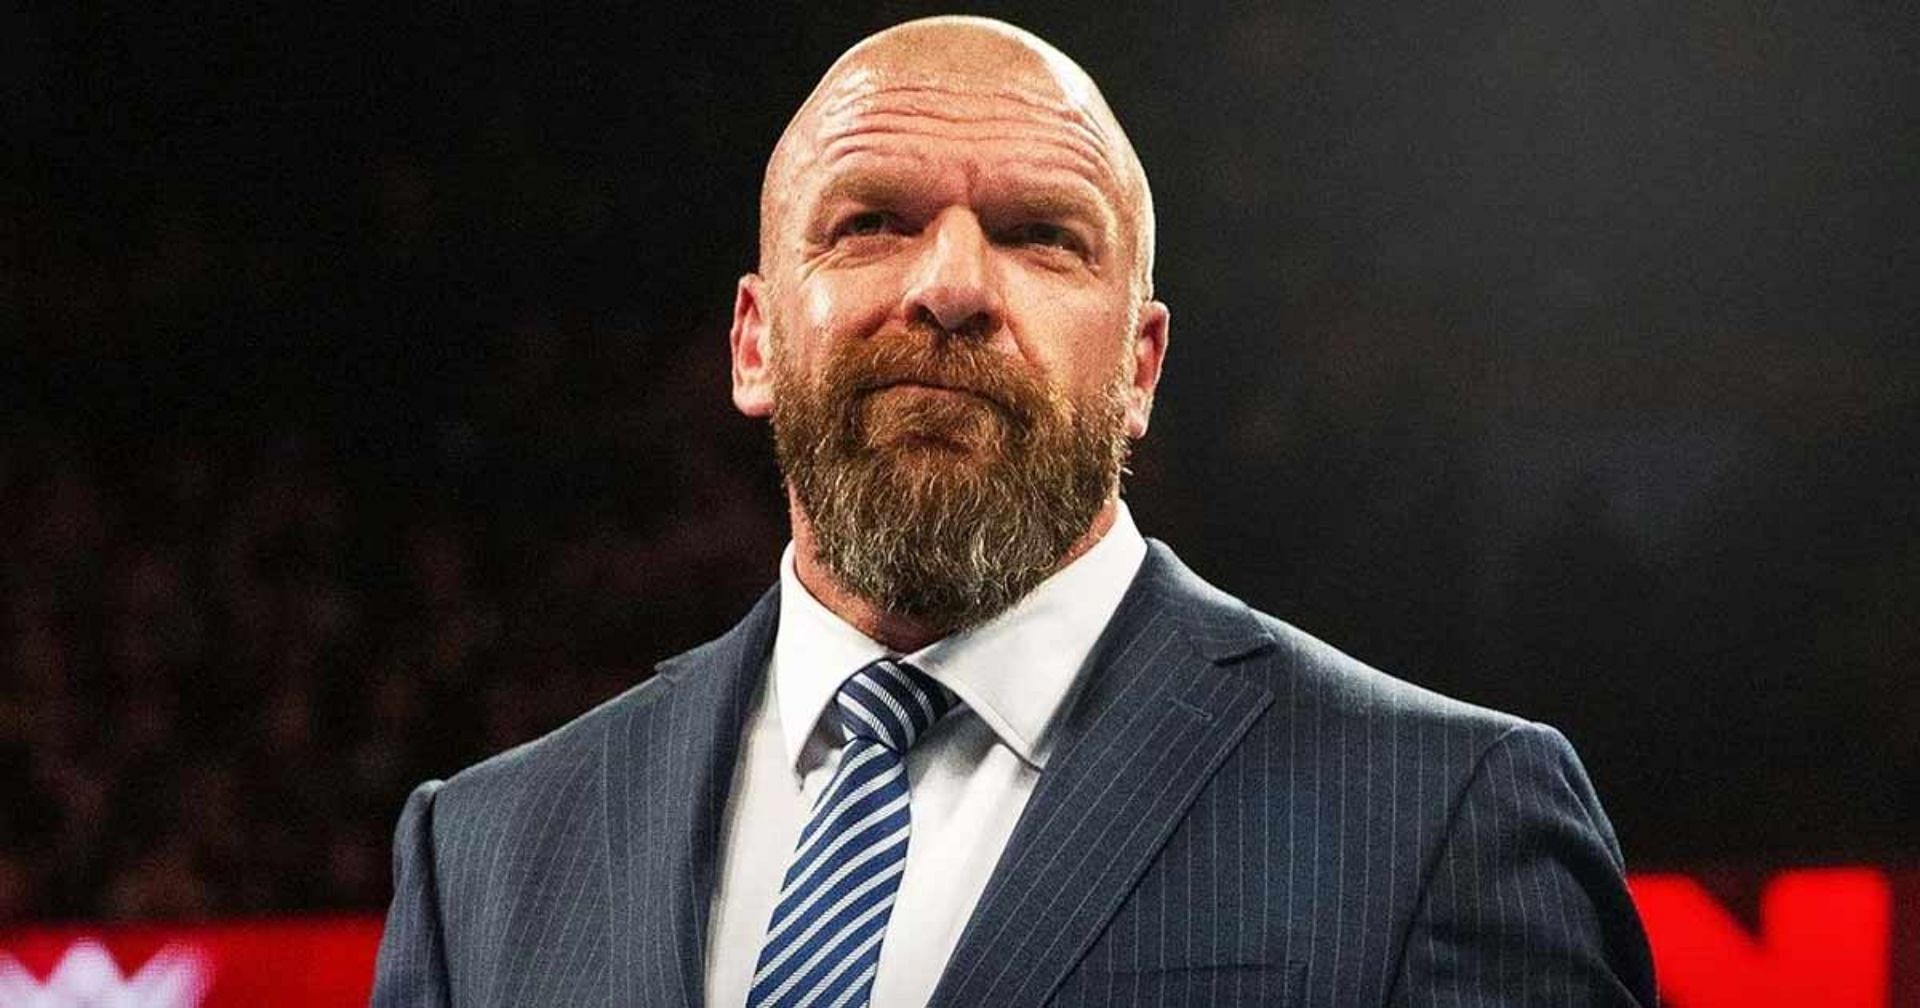 Triple H has made many changes as head of WWE creative.